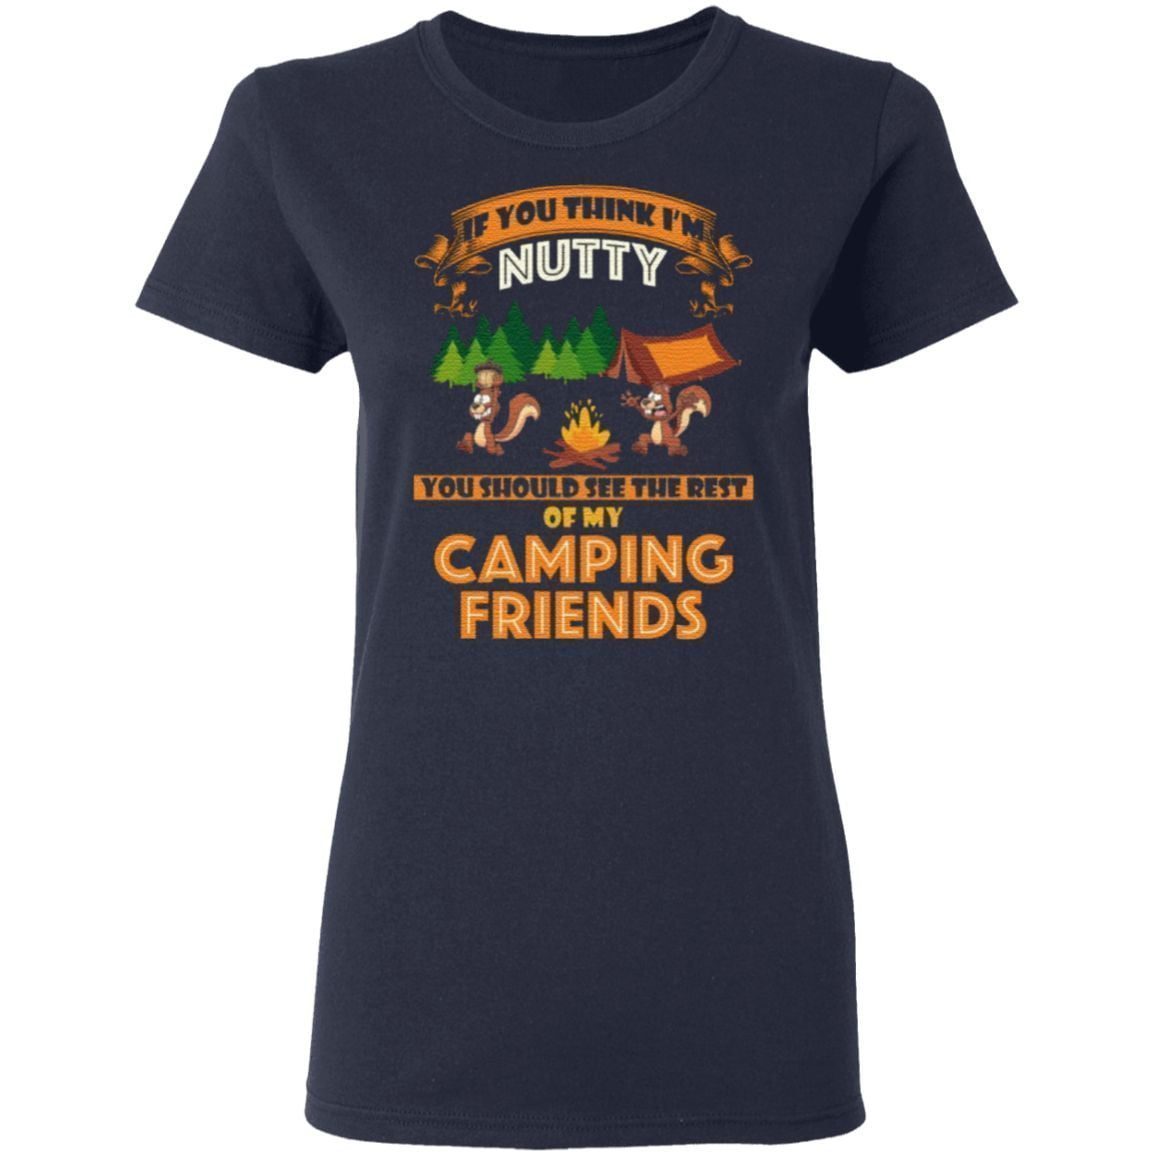 If you think i’m nutty you should see the rest of my camping friends t shirt